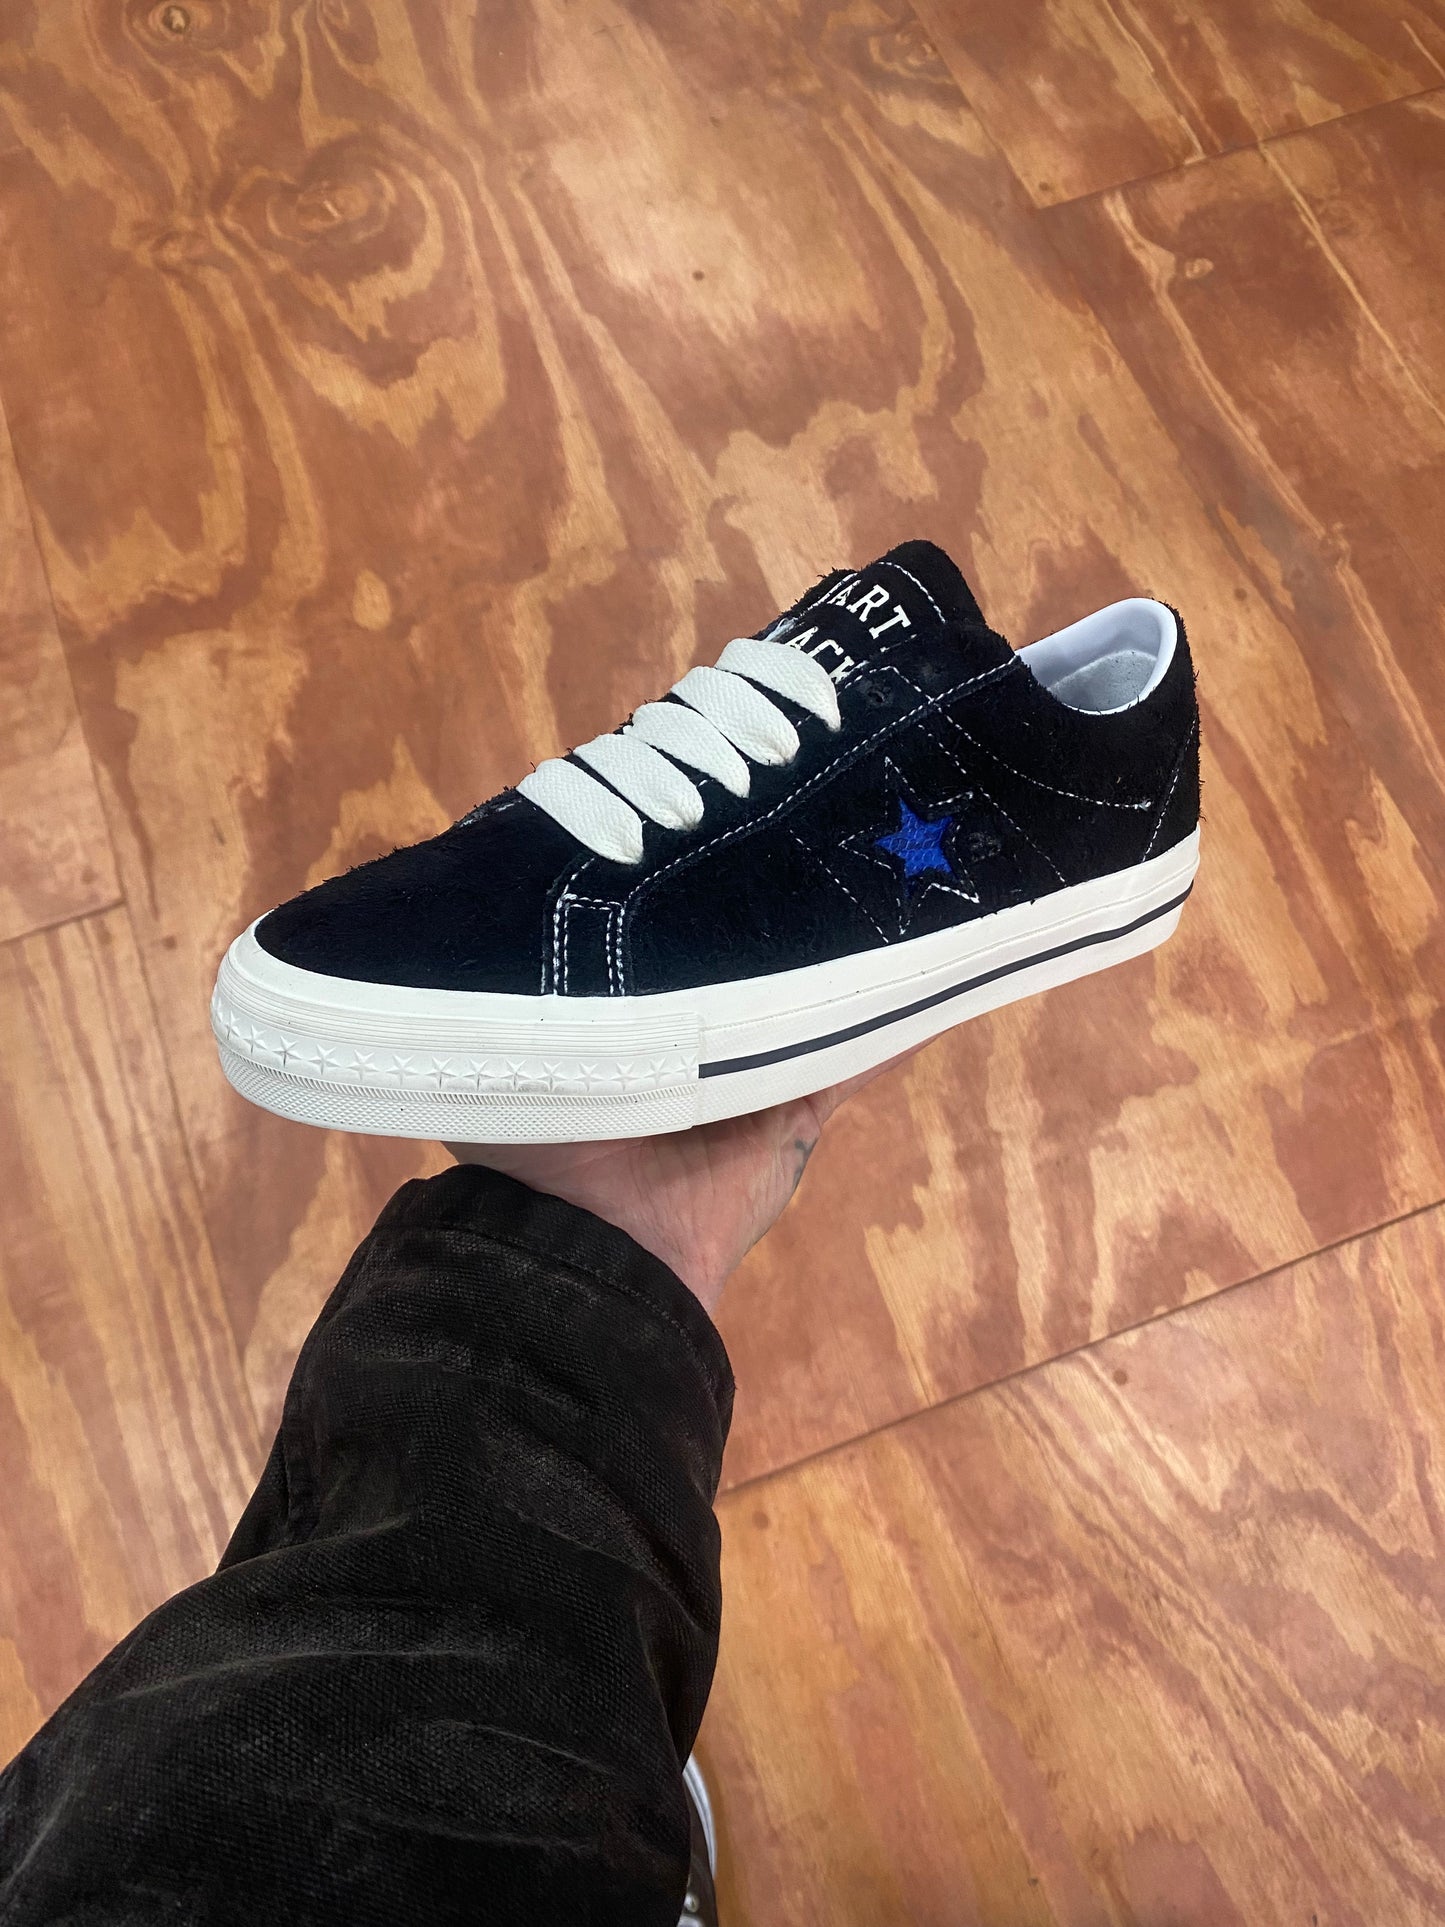 black suede sneaker with blue star, white sole and stitch